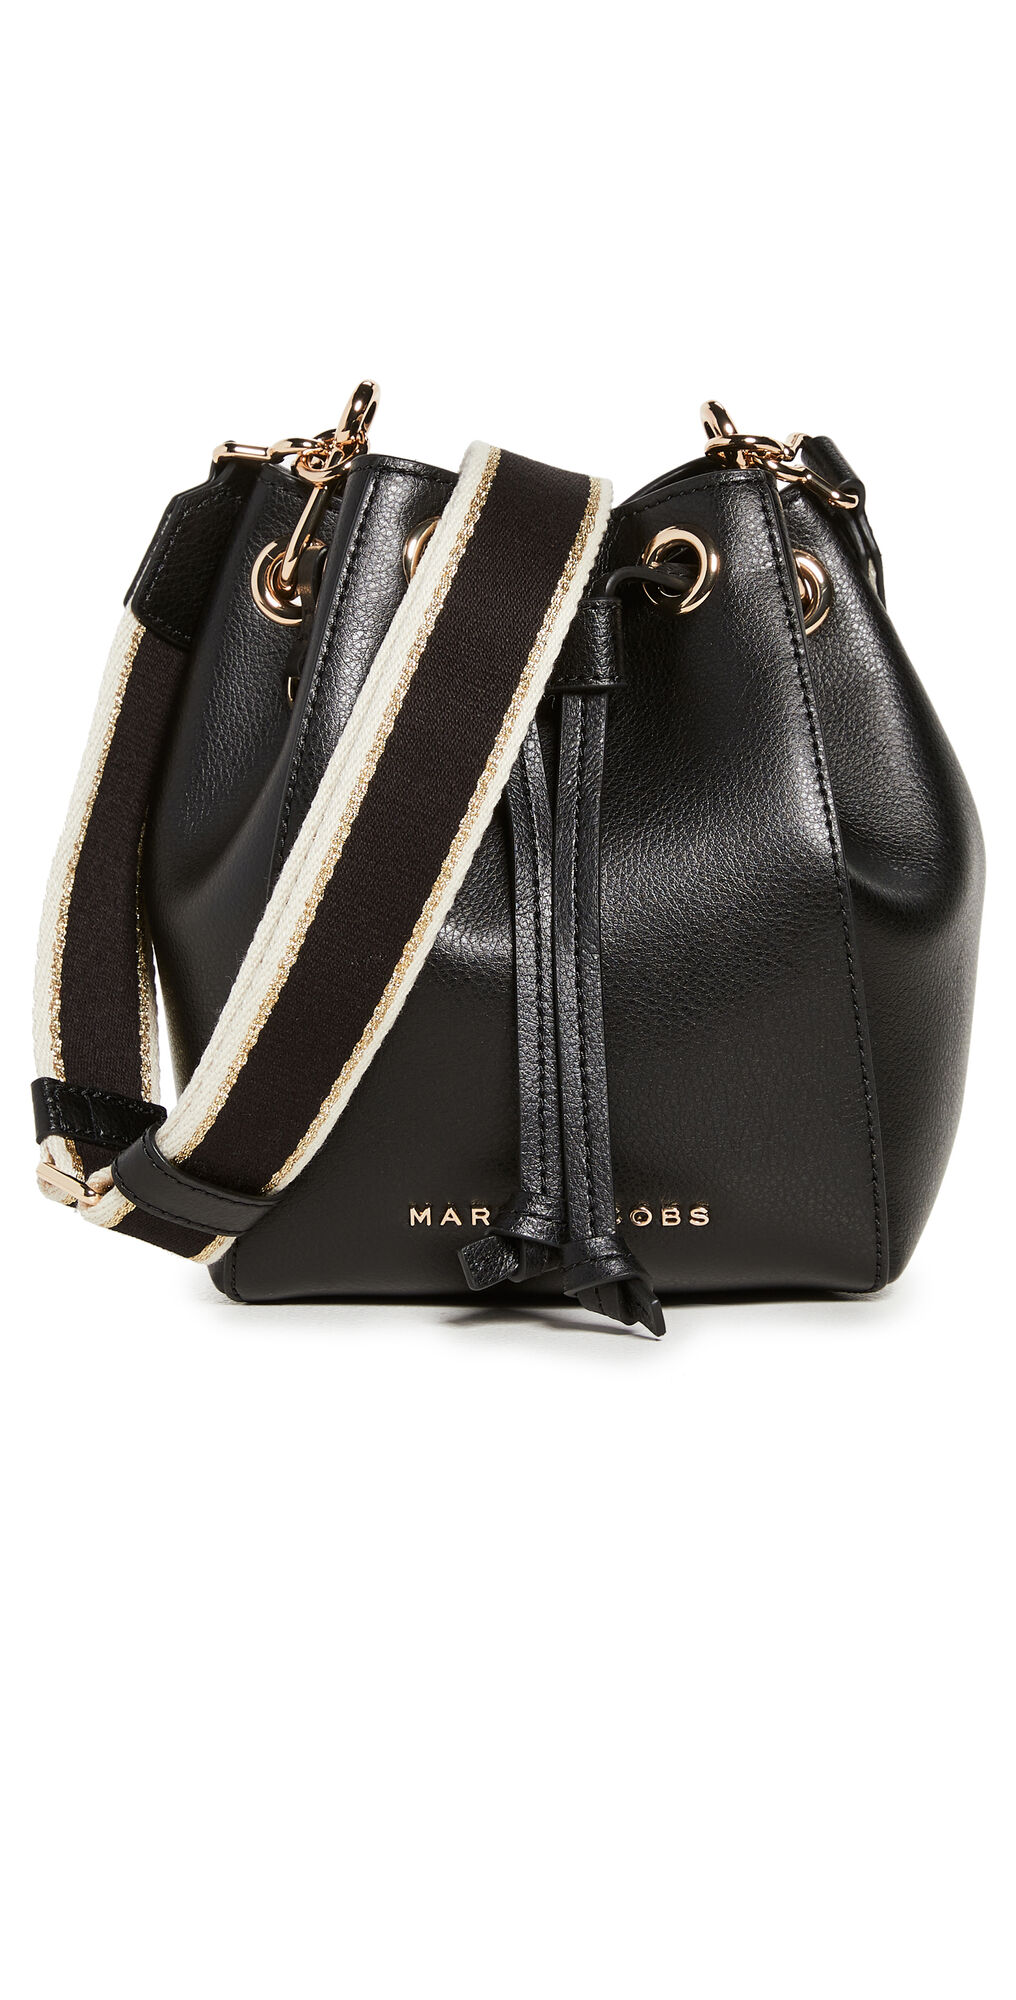 The Marc Jacobs The Bucket Bag Black One Size  Black  size:One Size